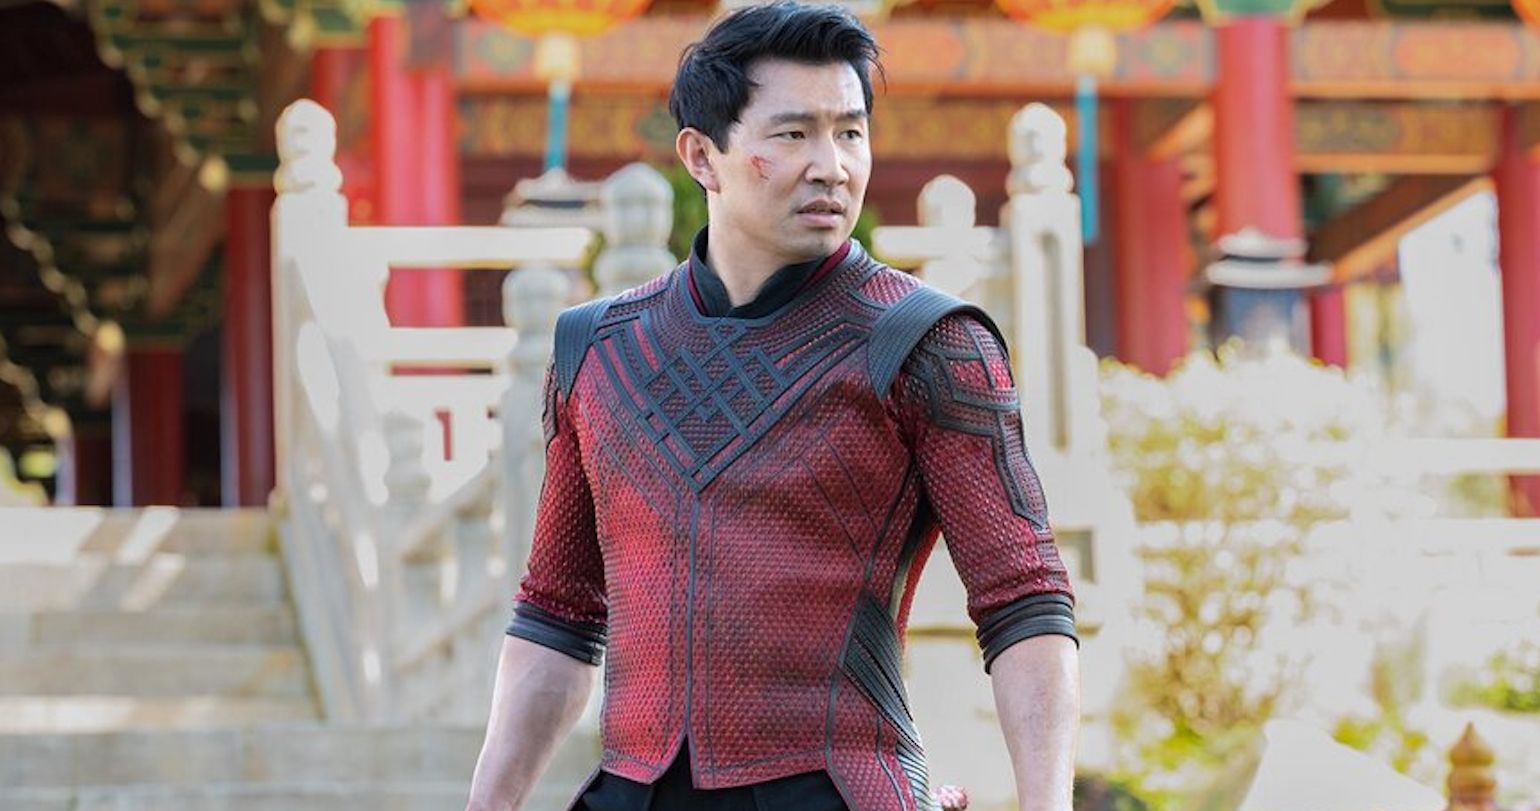 First Shang-Chi Images Have Simu Liu Suited Up as Marvel's Newest MCU Superhero